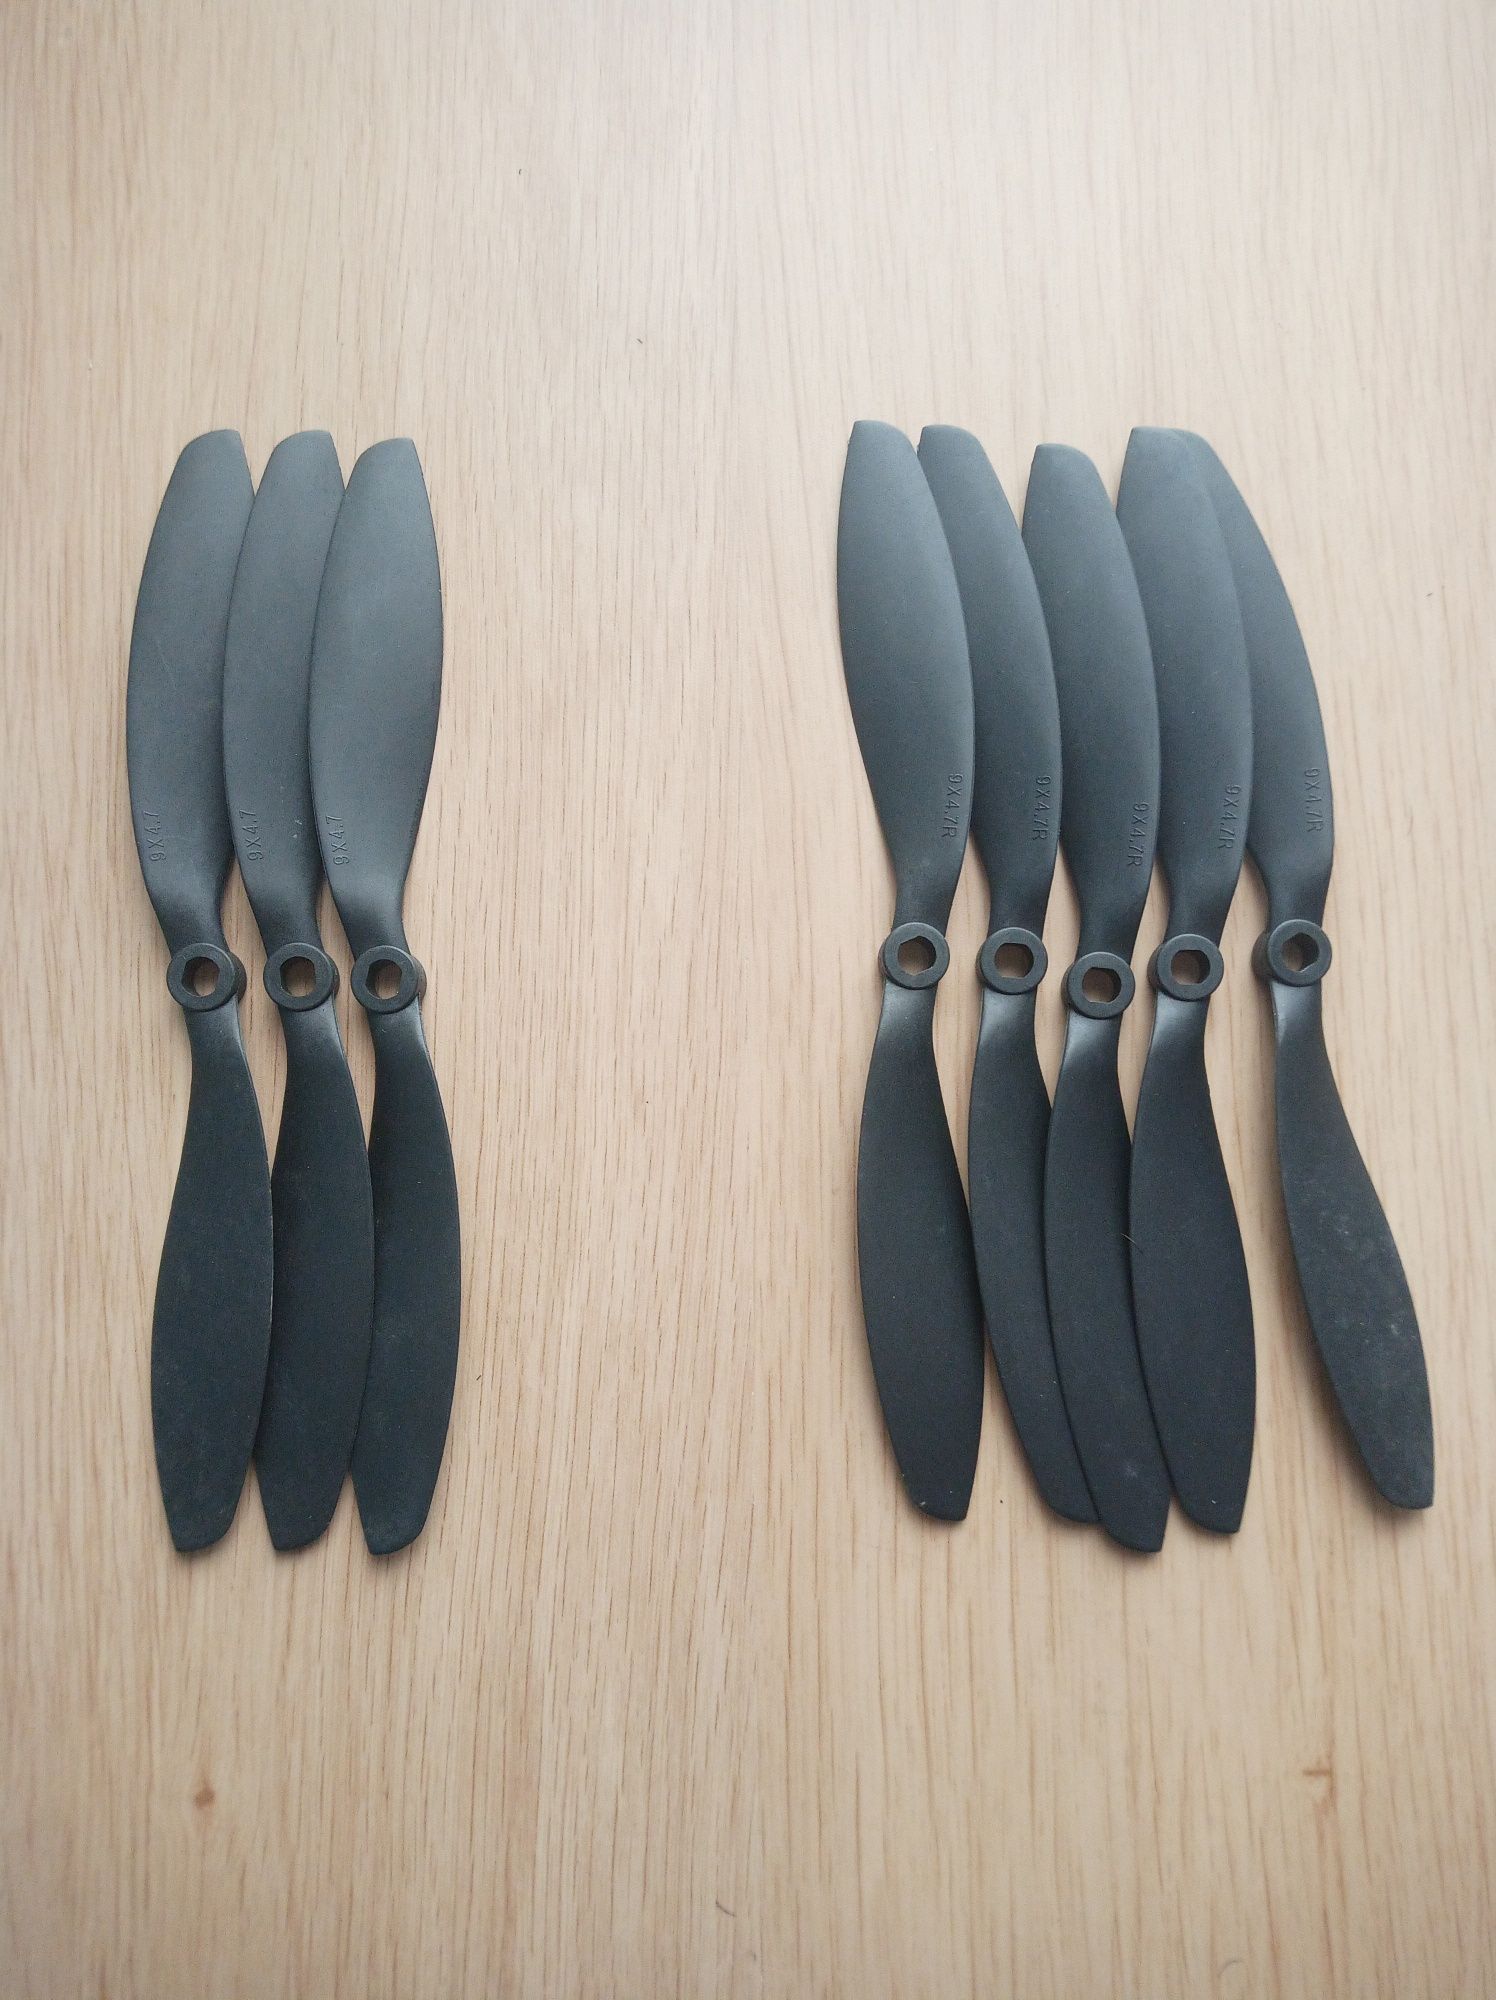 Propellers Drone 9x4.7 helices